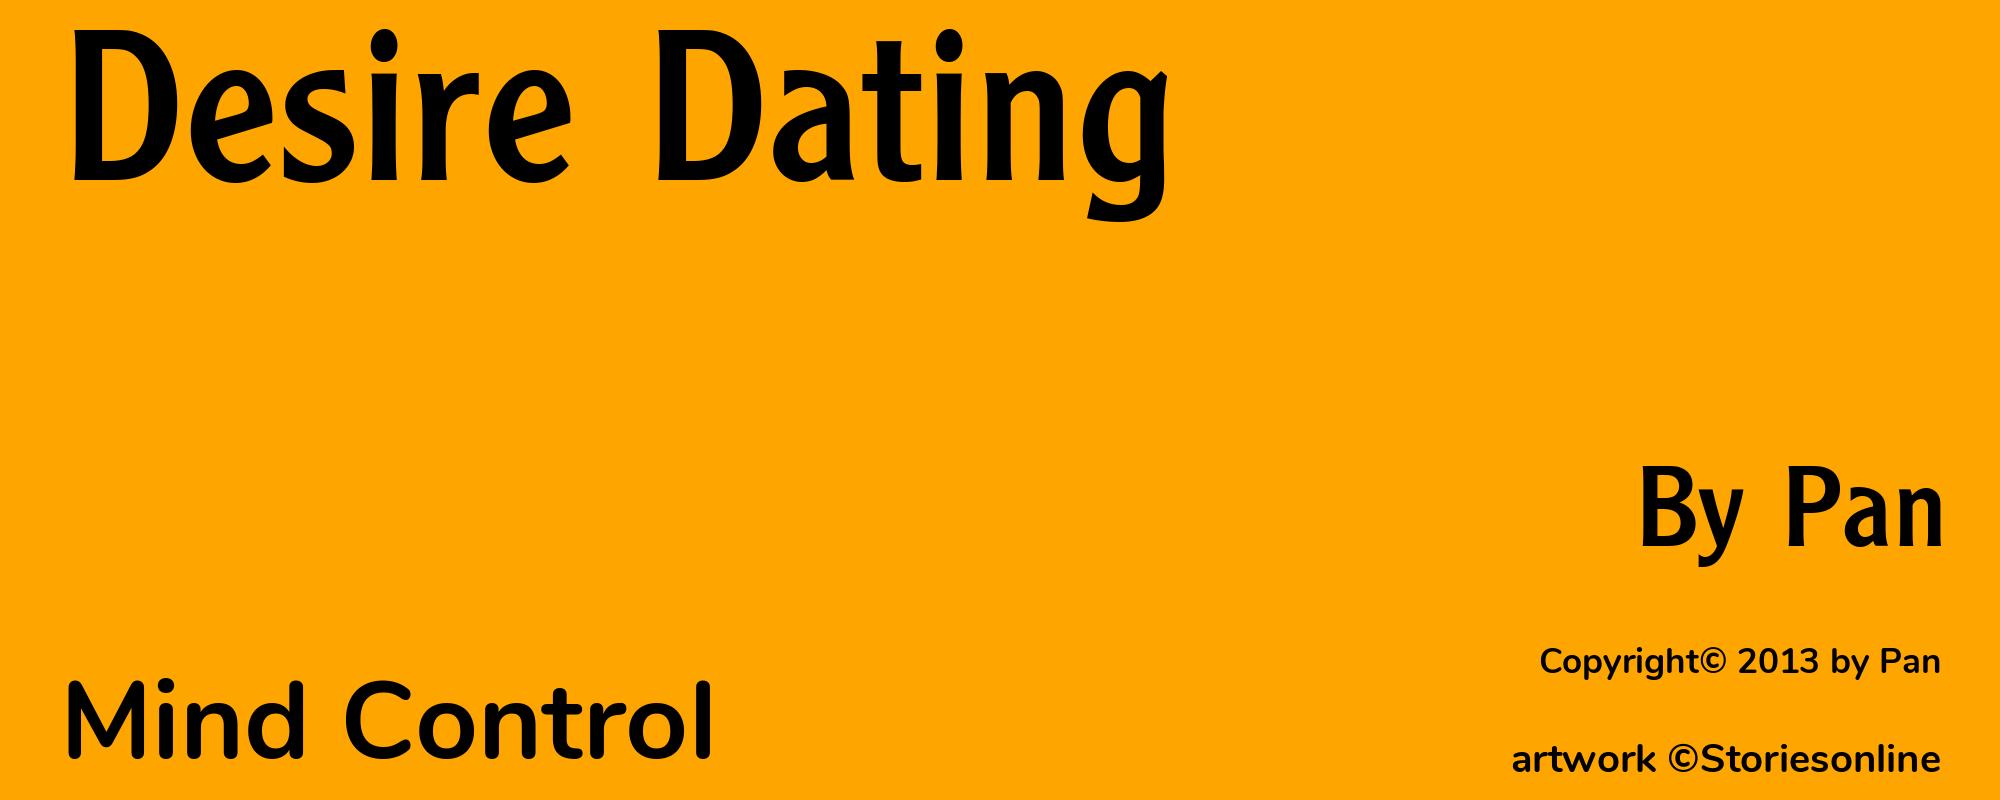 Desire Dating - Cover